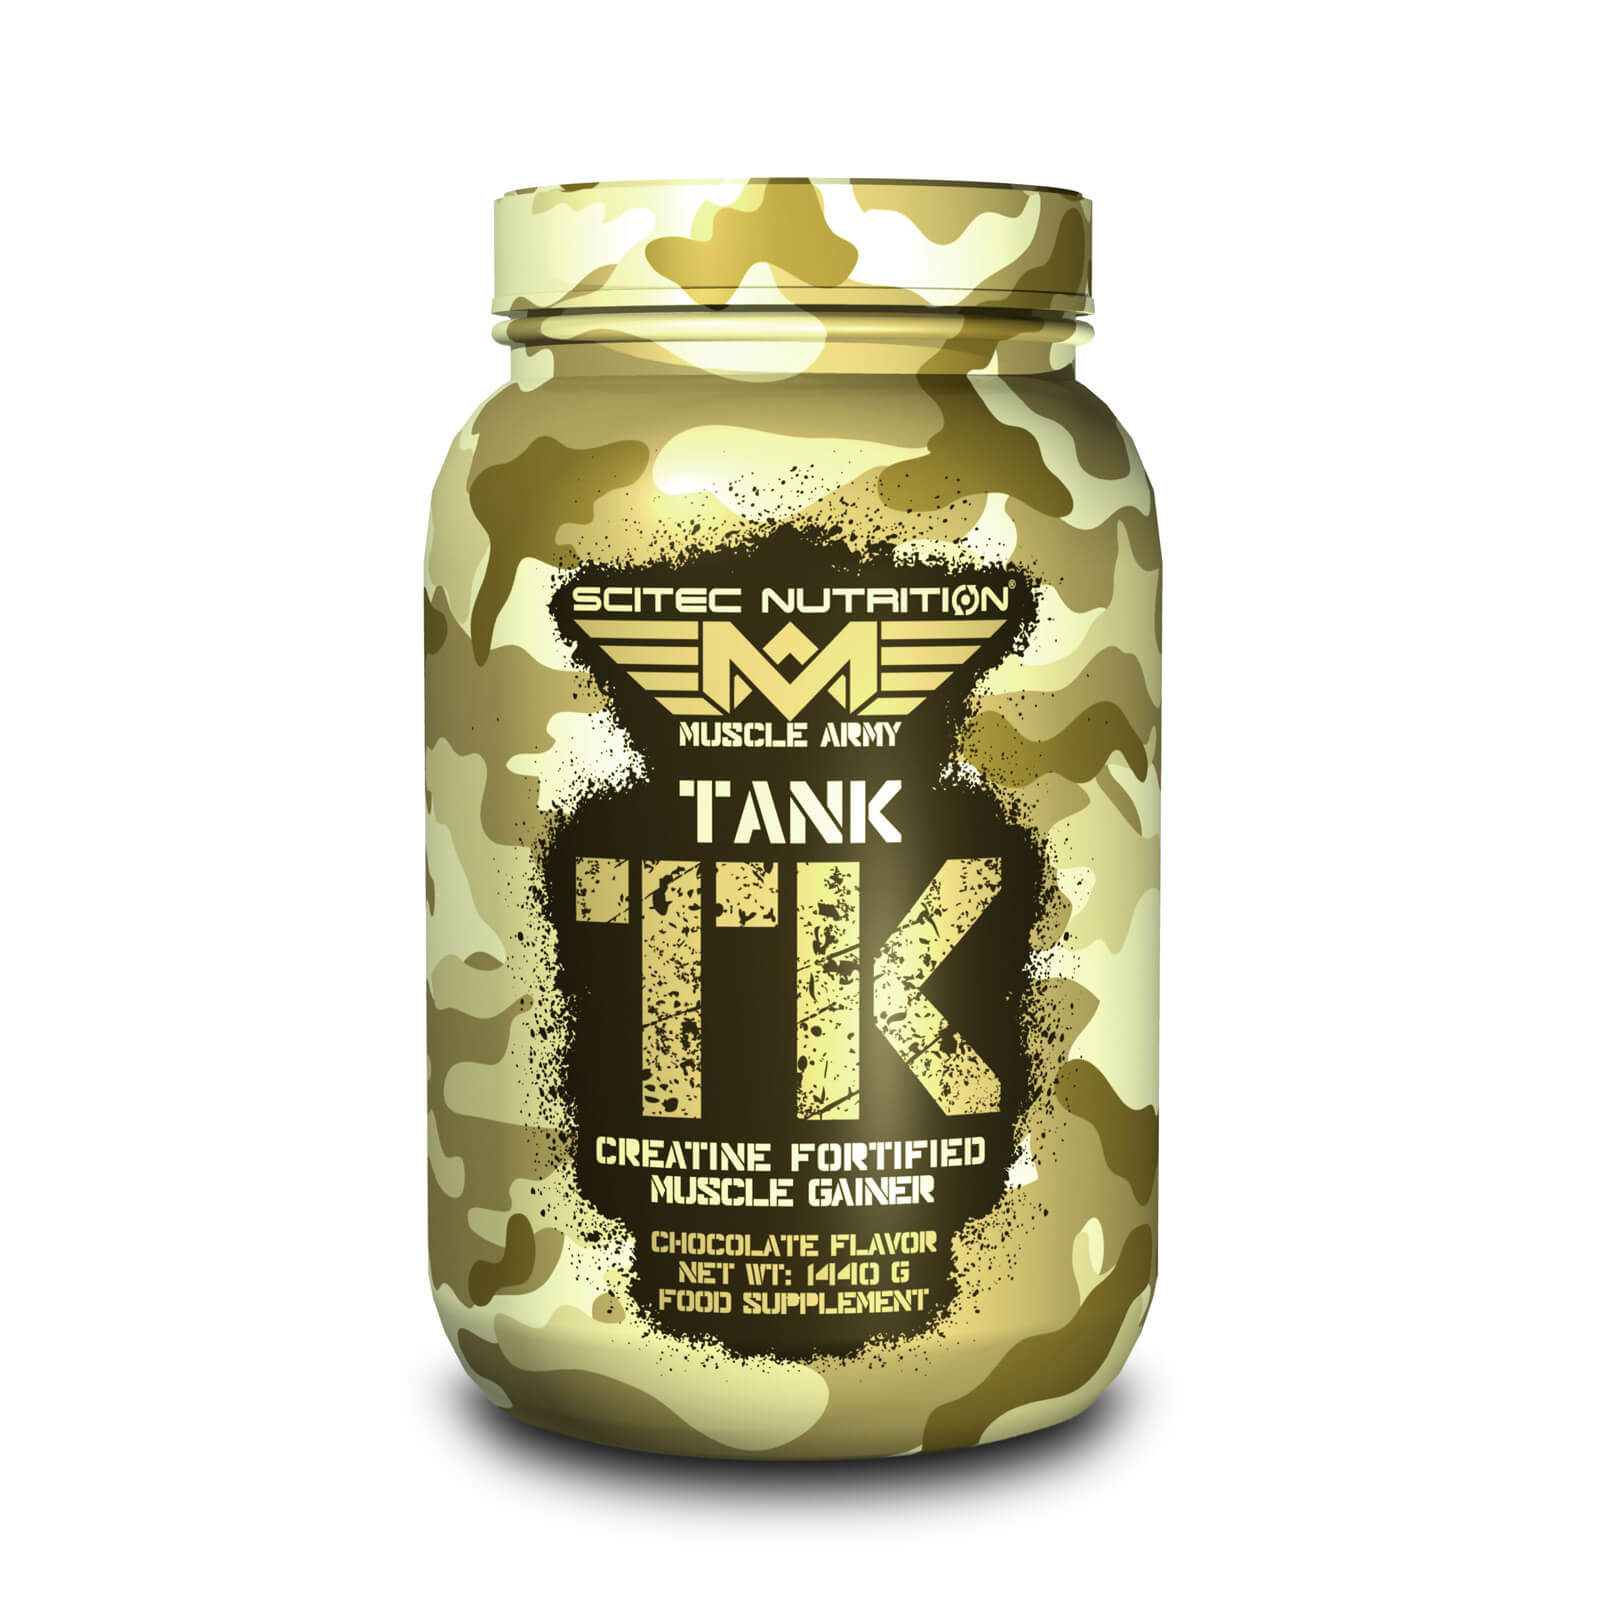 Tank, 1440 g, Muscle Army